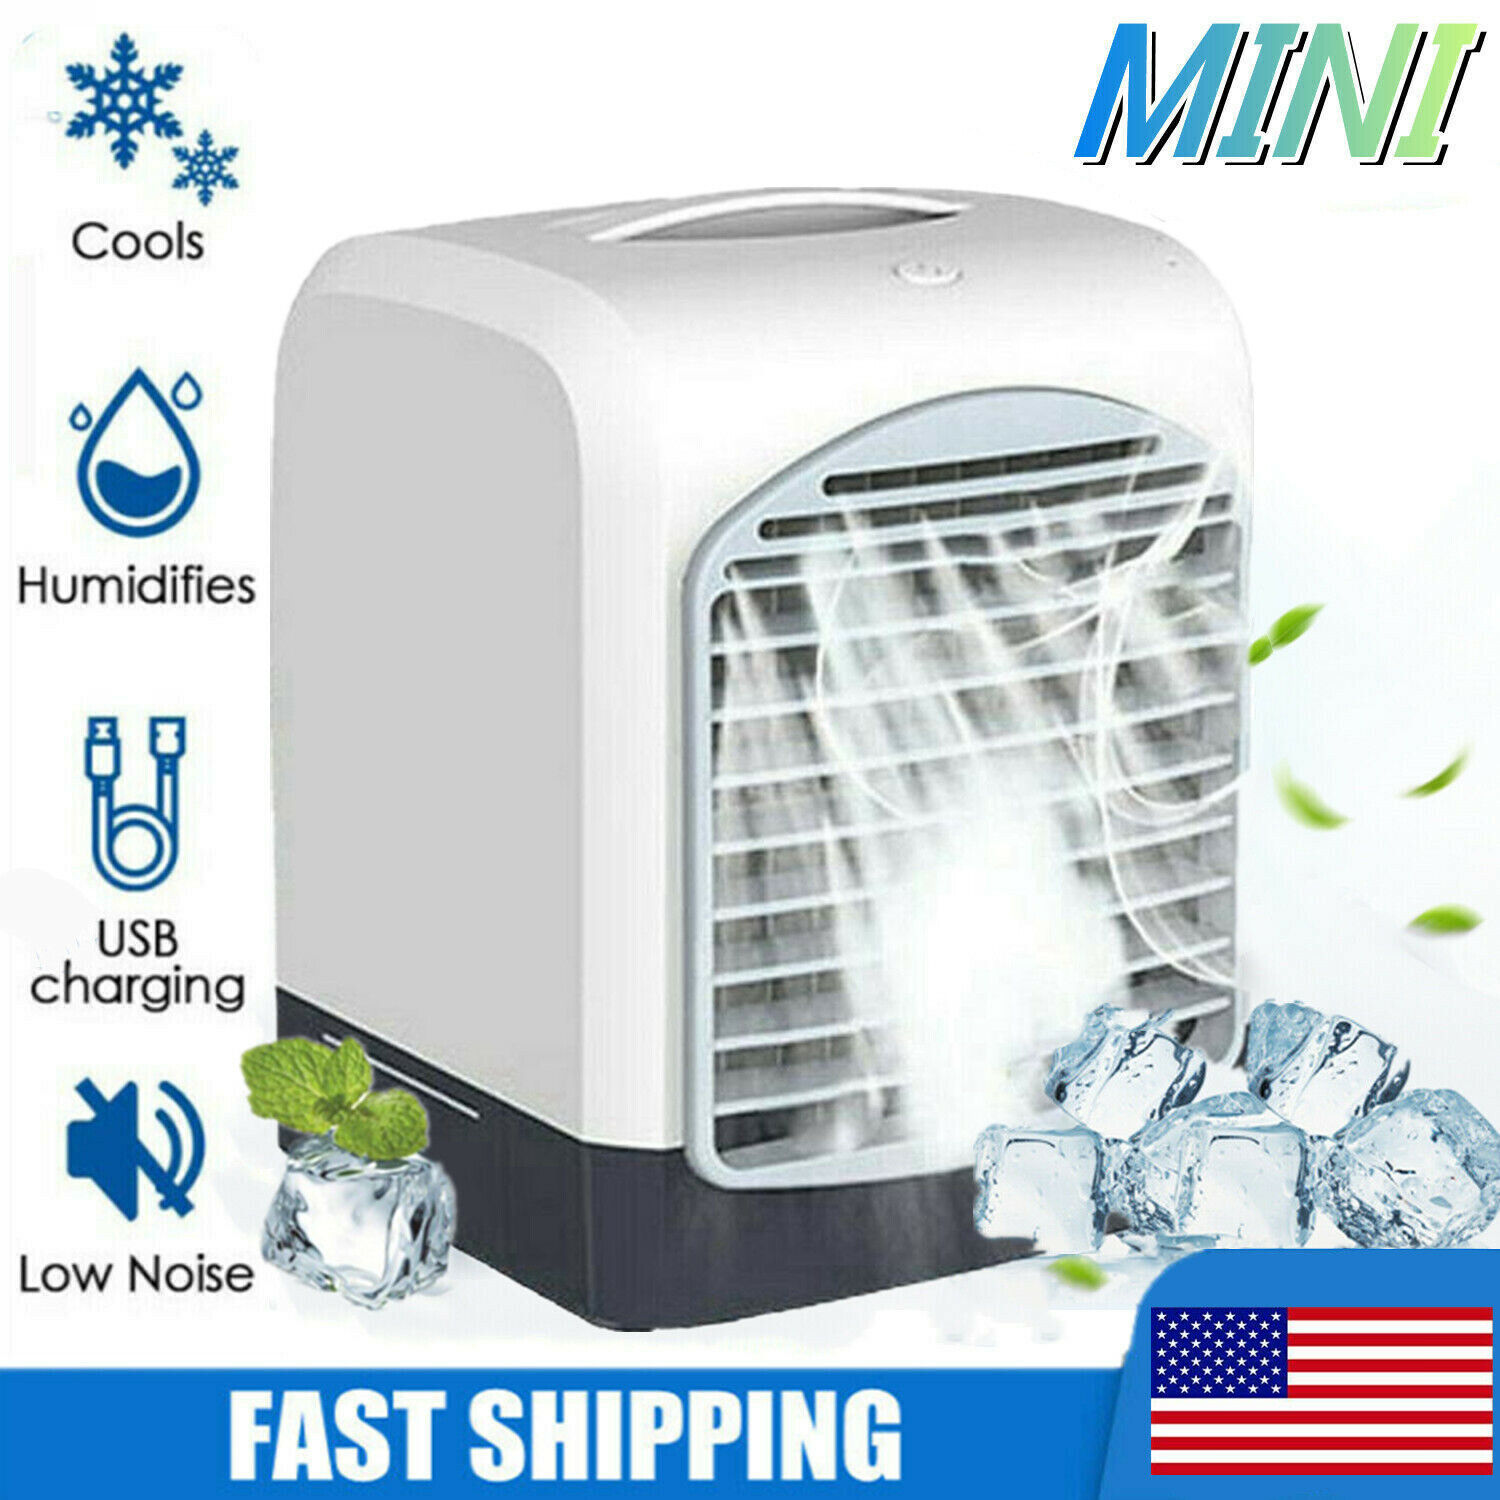 Portable Popular brand in the world Mini AC Air Conditioner Personal Fan Cooling Humidi Max 64% OFF